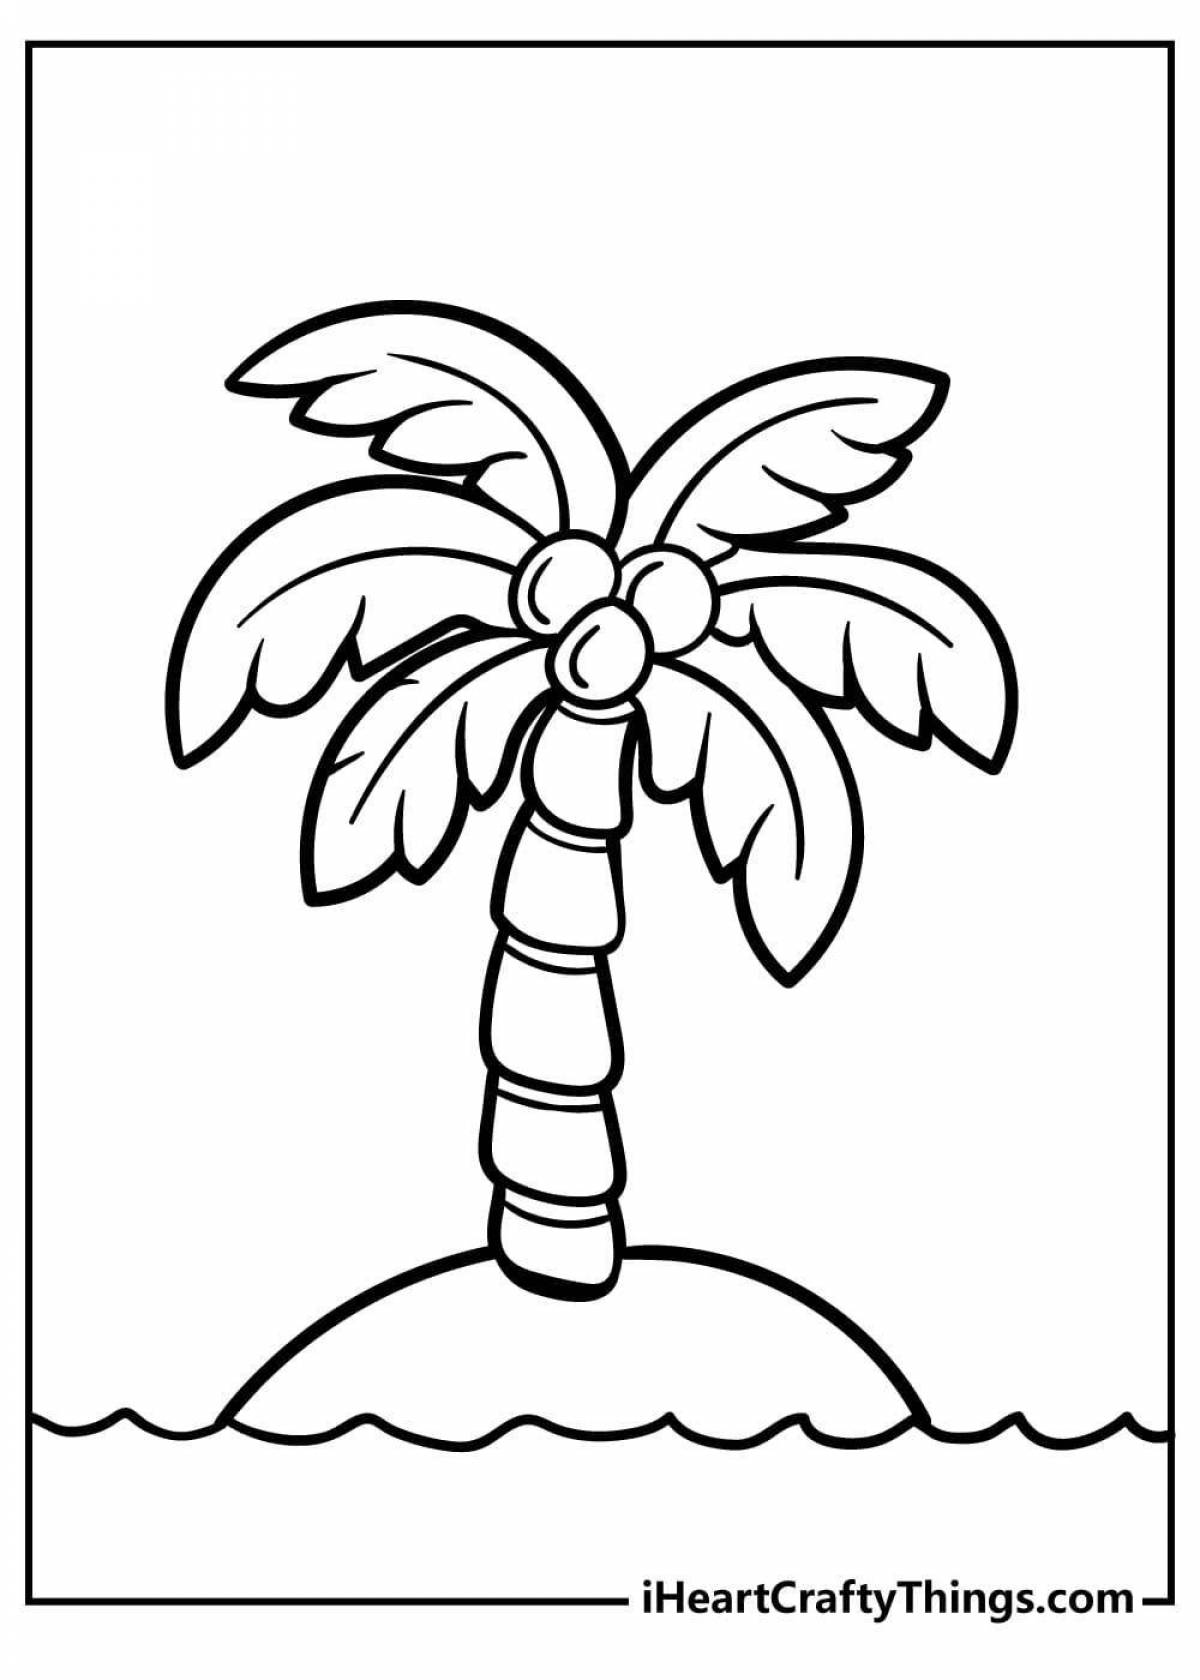 Useful date fruit coloring page